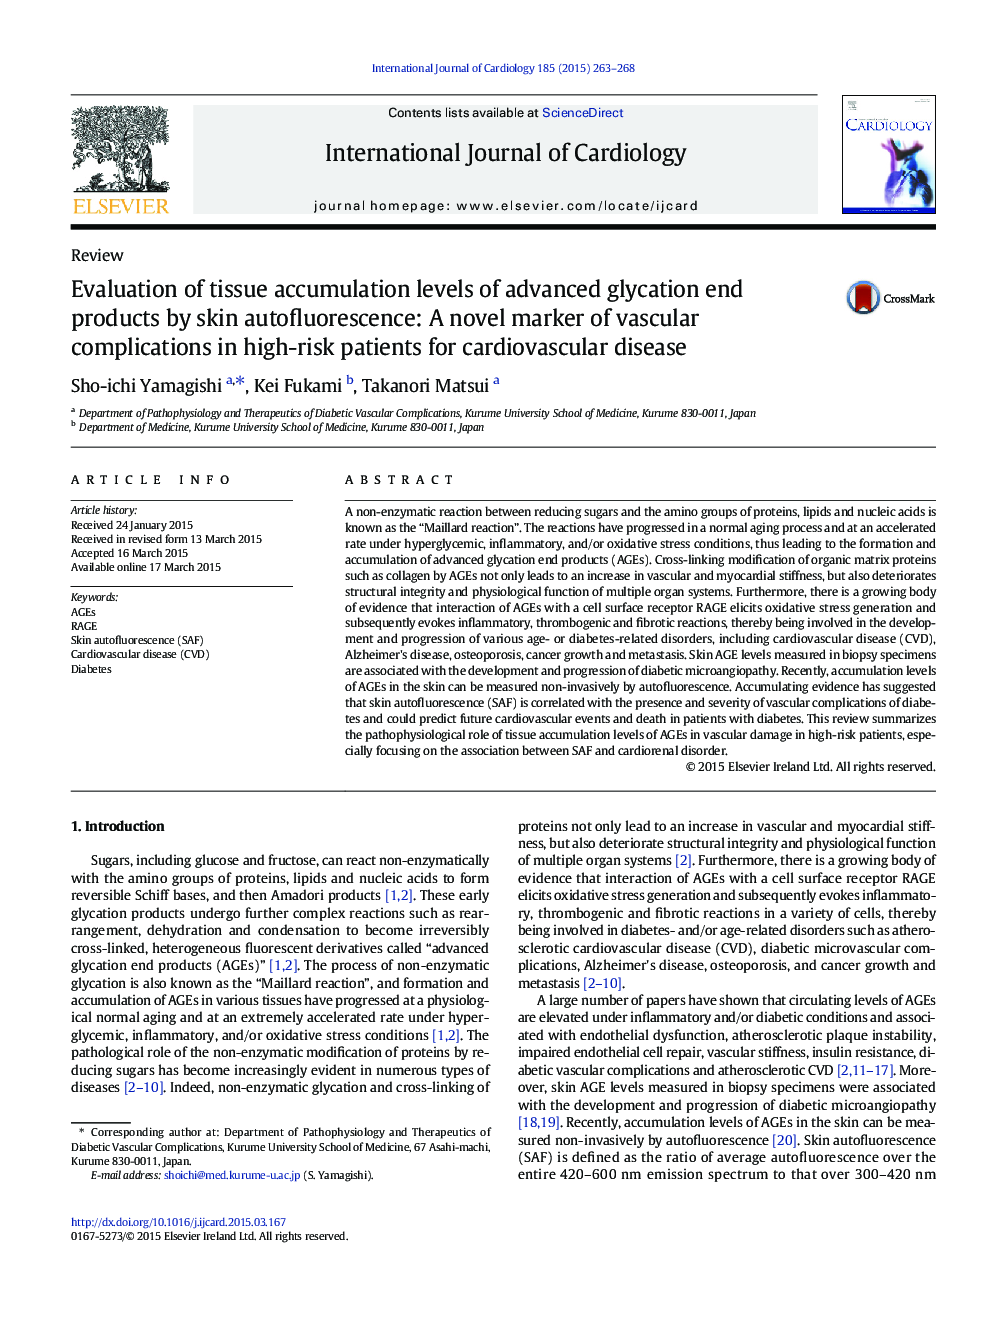 Evaluation of tissue accumulation levels of advanced glycation end products by skin autofluorescence: A novel marker of vascular complications in high-risk patients for cardiovascular disease